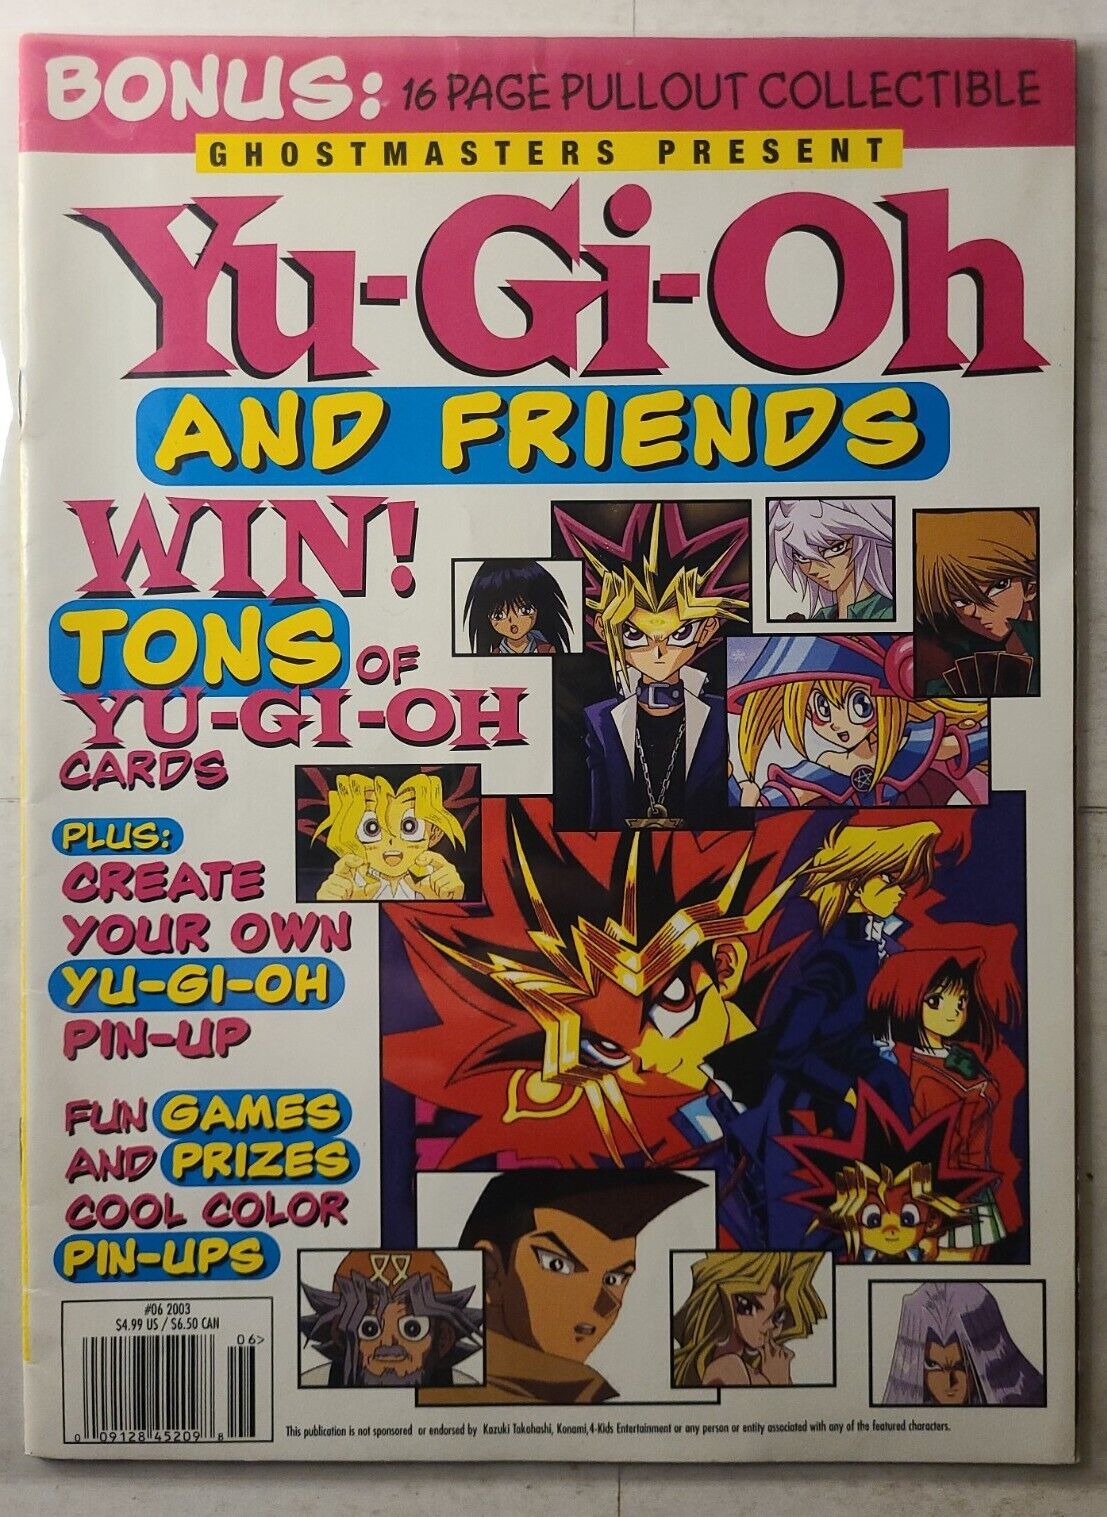 Rare Ghostmasters Present Yu-Gi-Oh And Friends Collector’s Edition 2003 #6